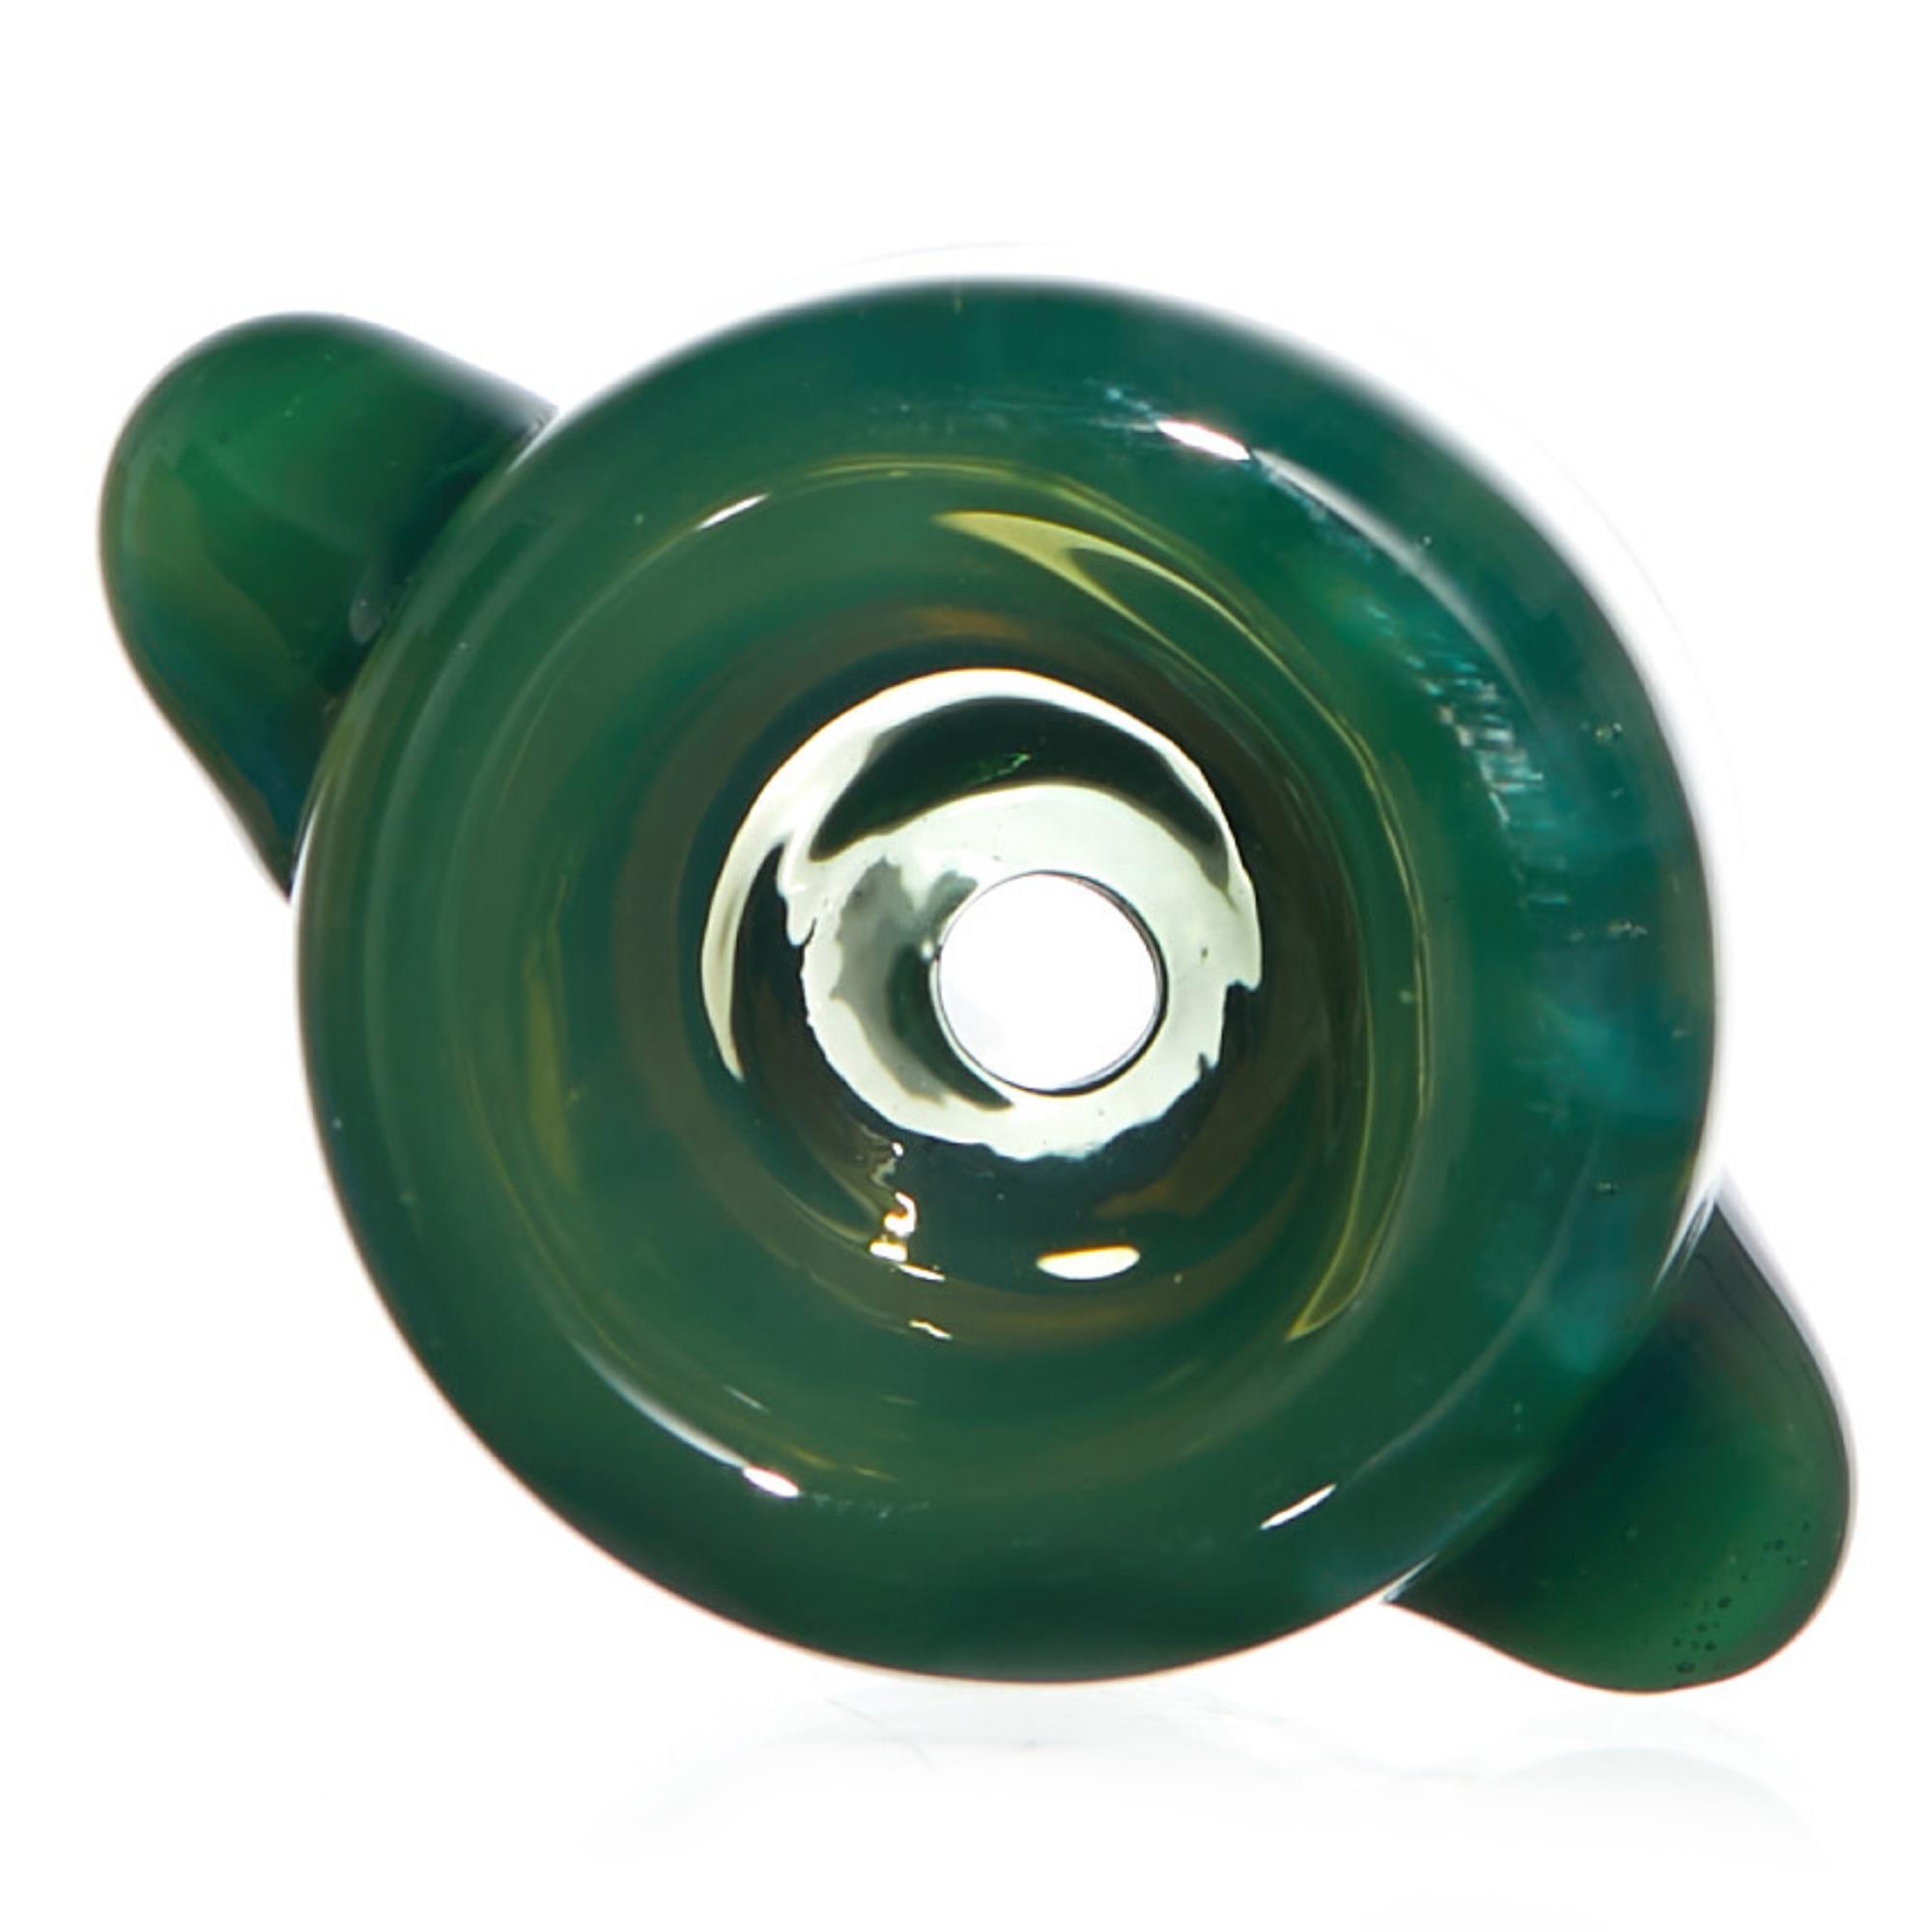 DROP IN GLASS BOWL